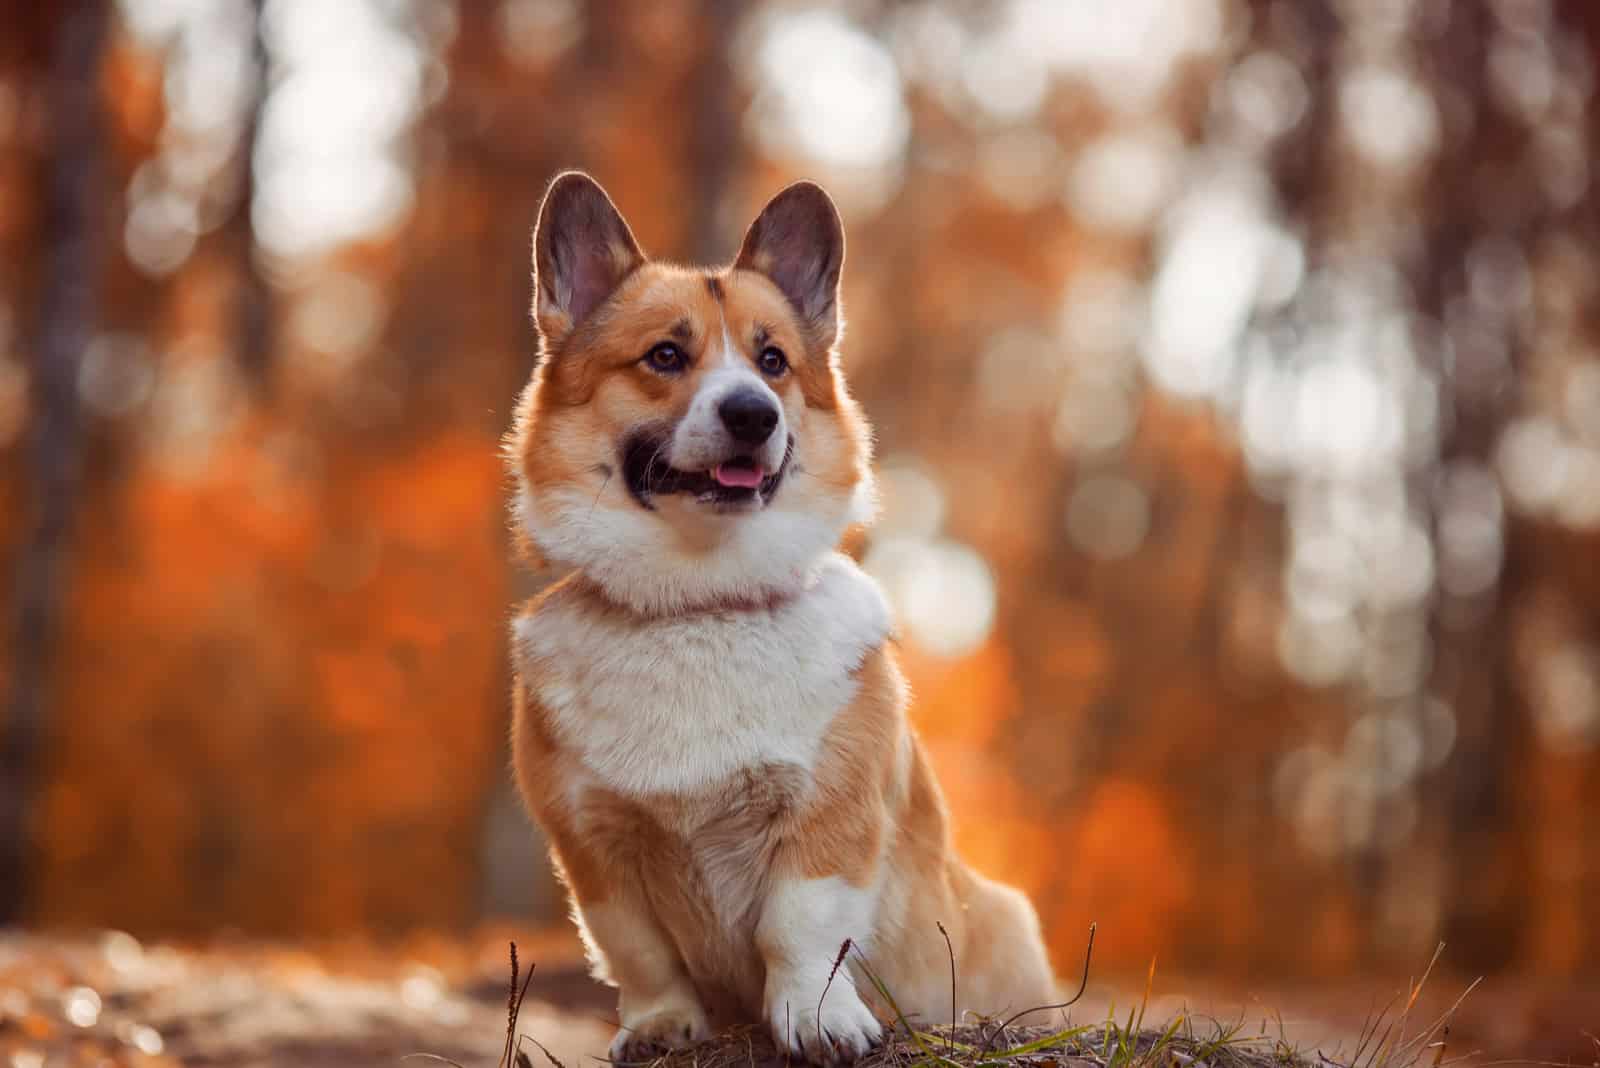 corgi photographed in a forest